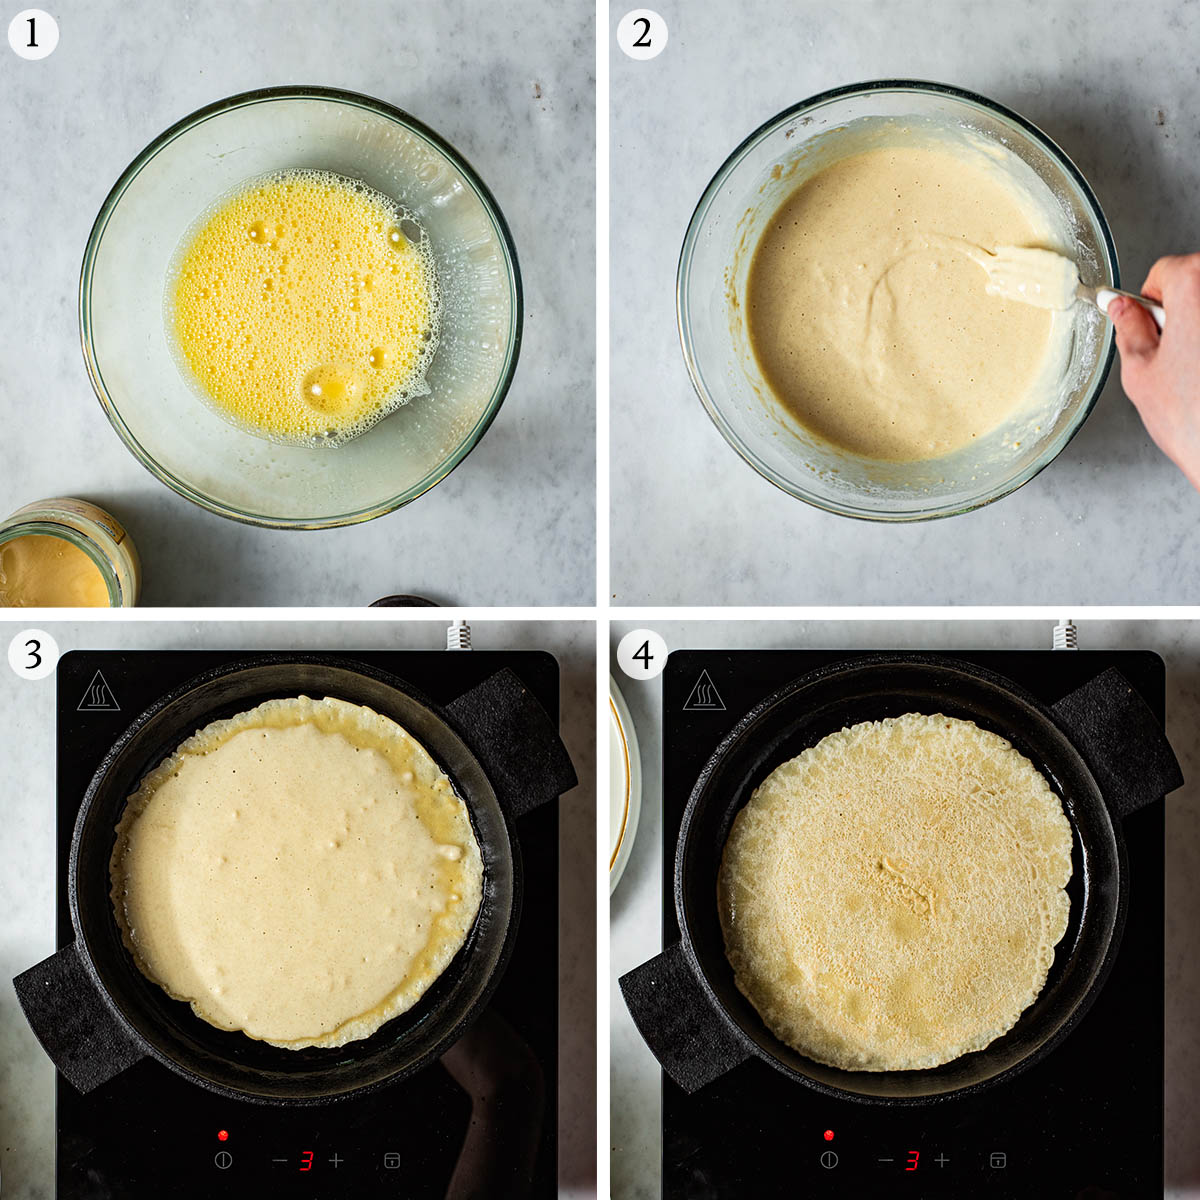 Flat pancakes steps 1 to 4, mixing the batter and cooking a pancake.